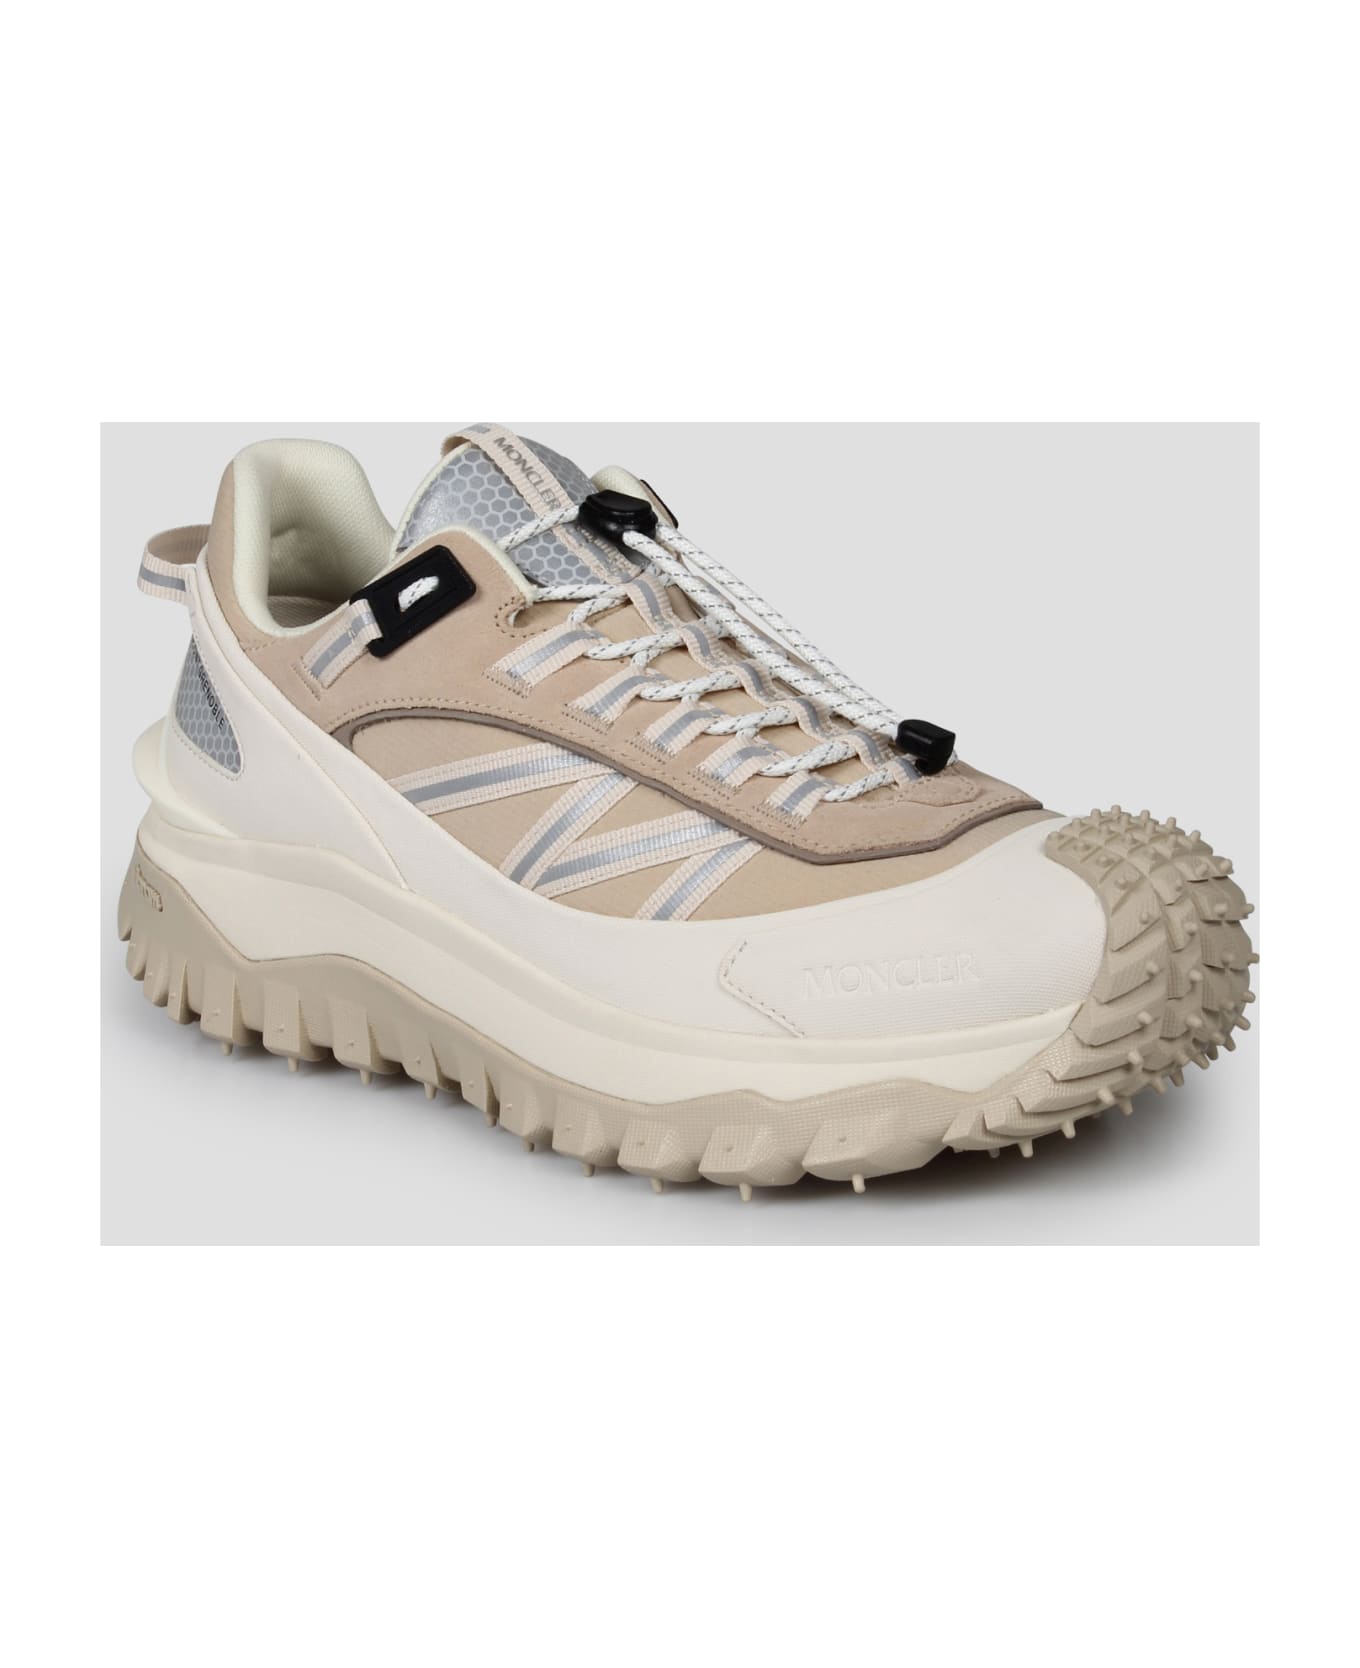 Moncler 'trailgrip' Sneakers - Nude & Neutrals スニーカー